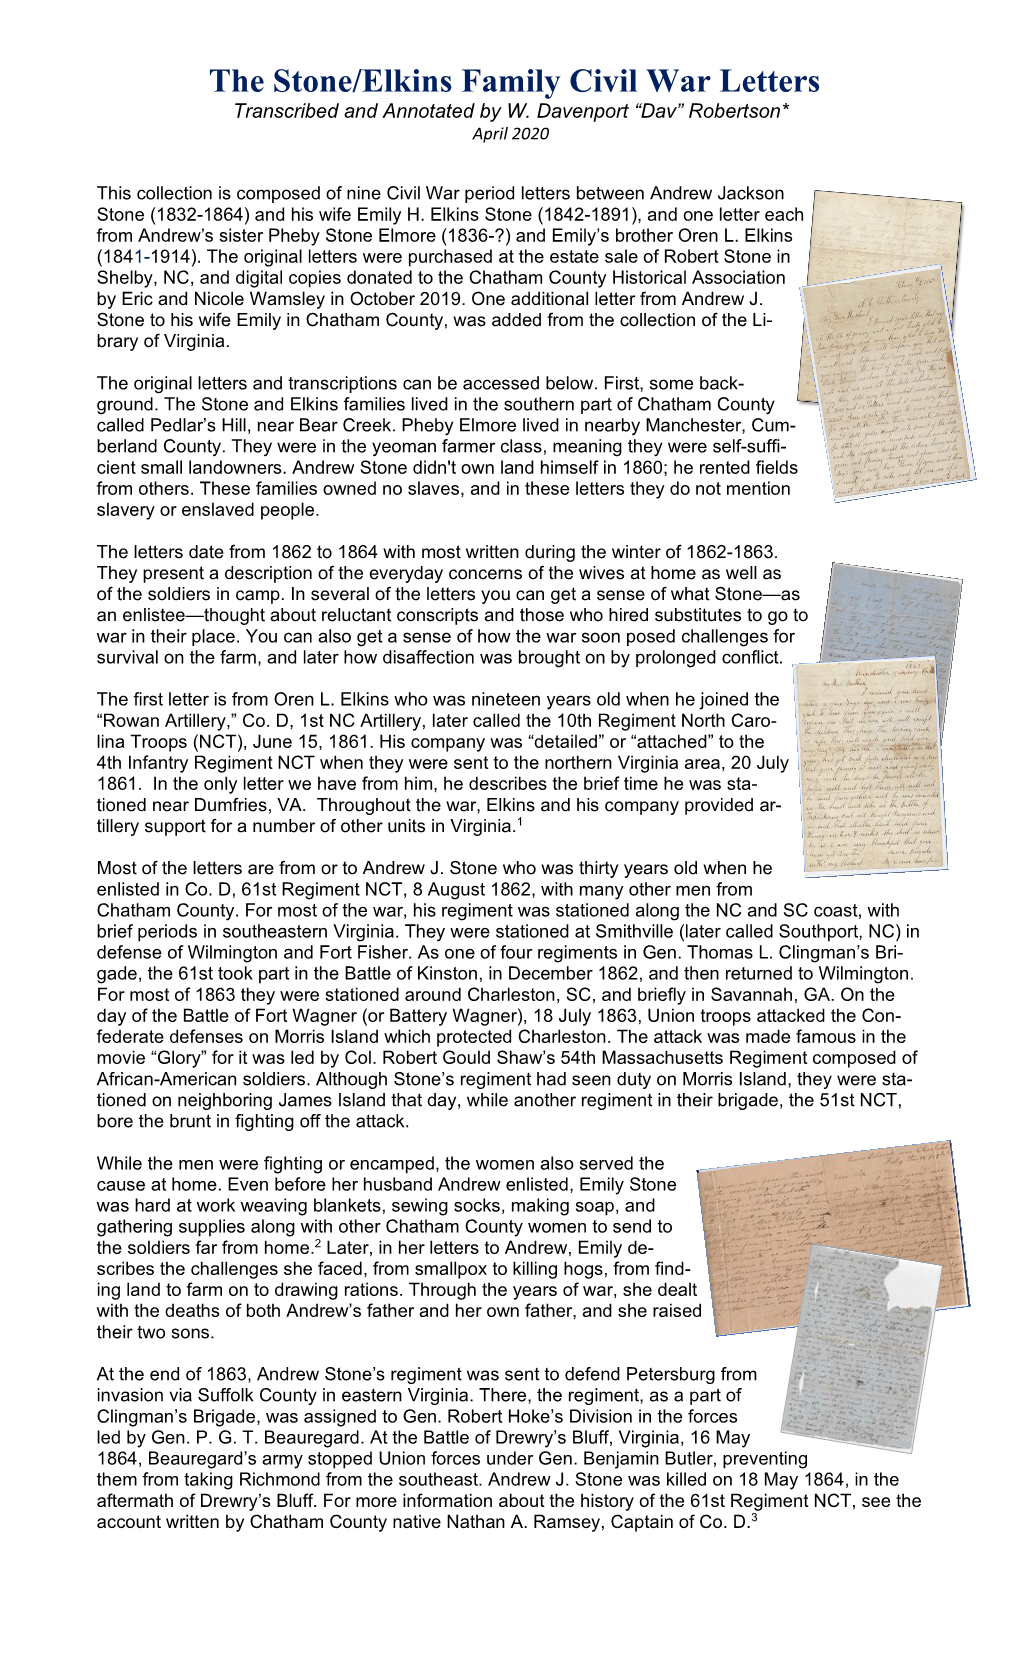 The Stone/Elkins Family Civil War Letters Transcribed and Annotated by W